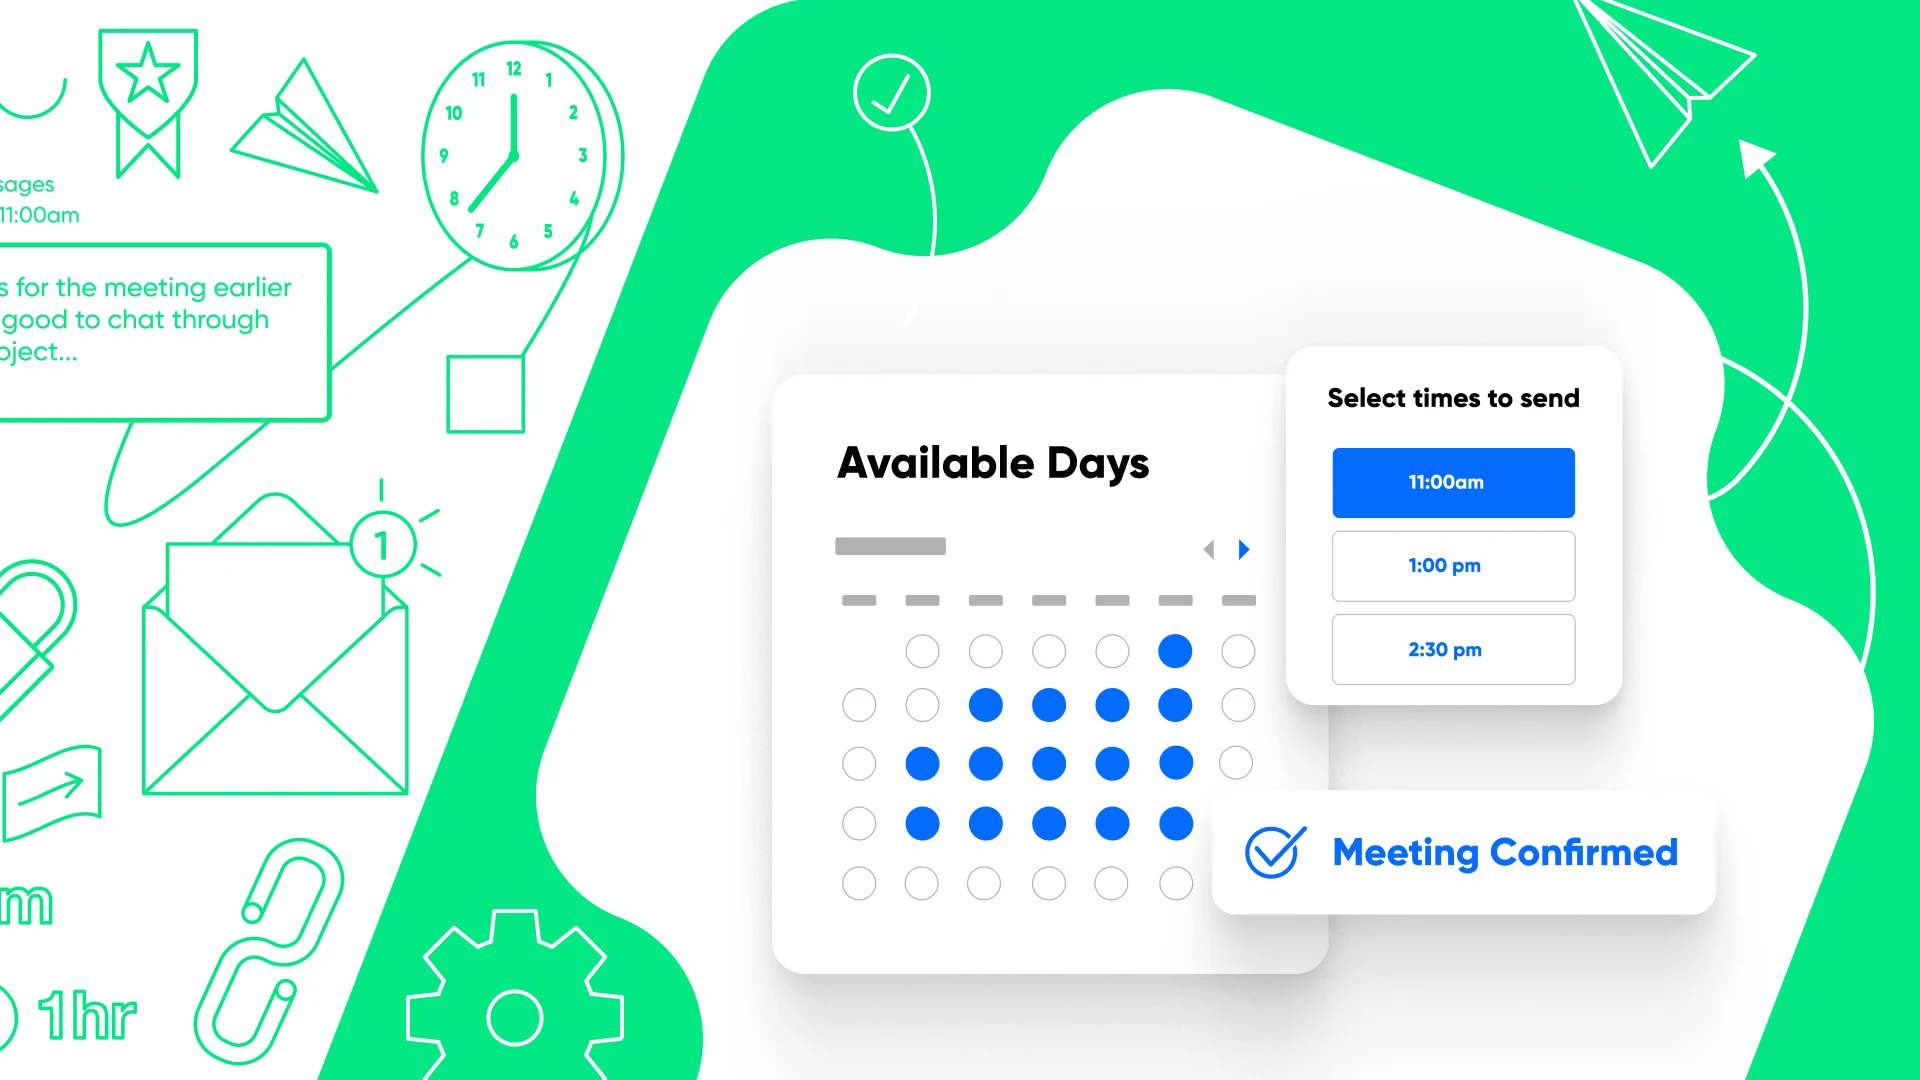 How to find a meeting time that works for everyone